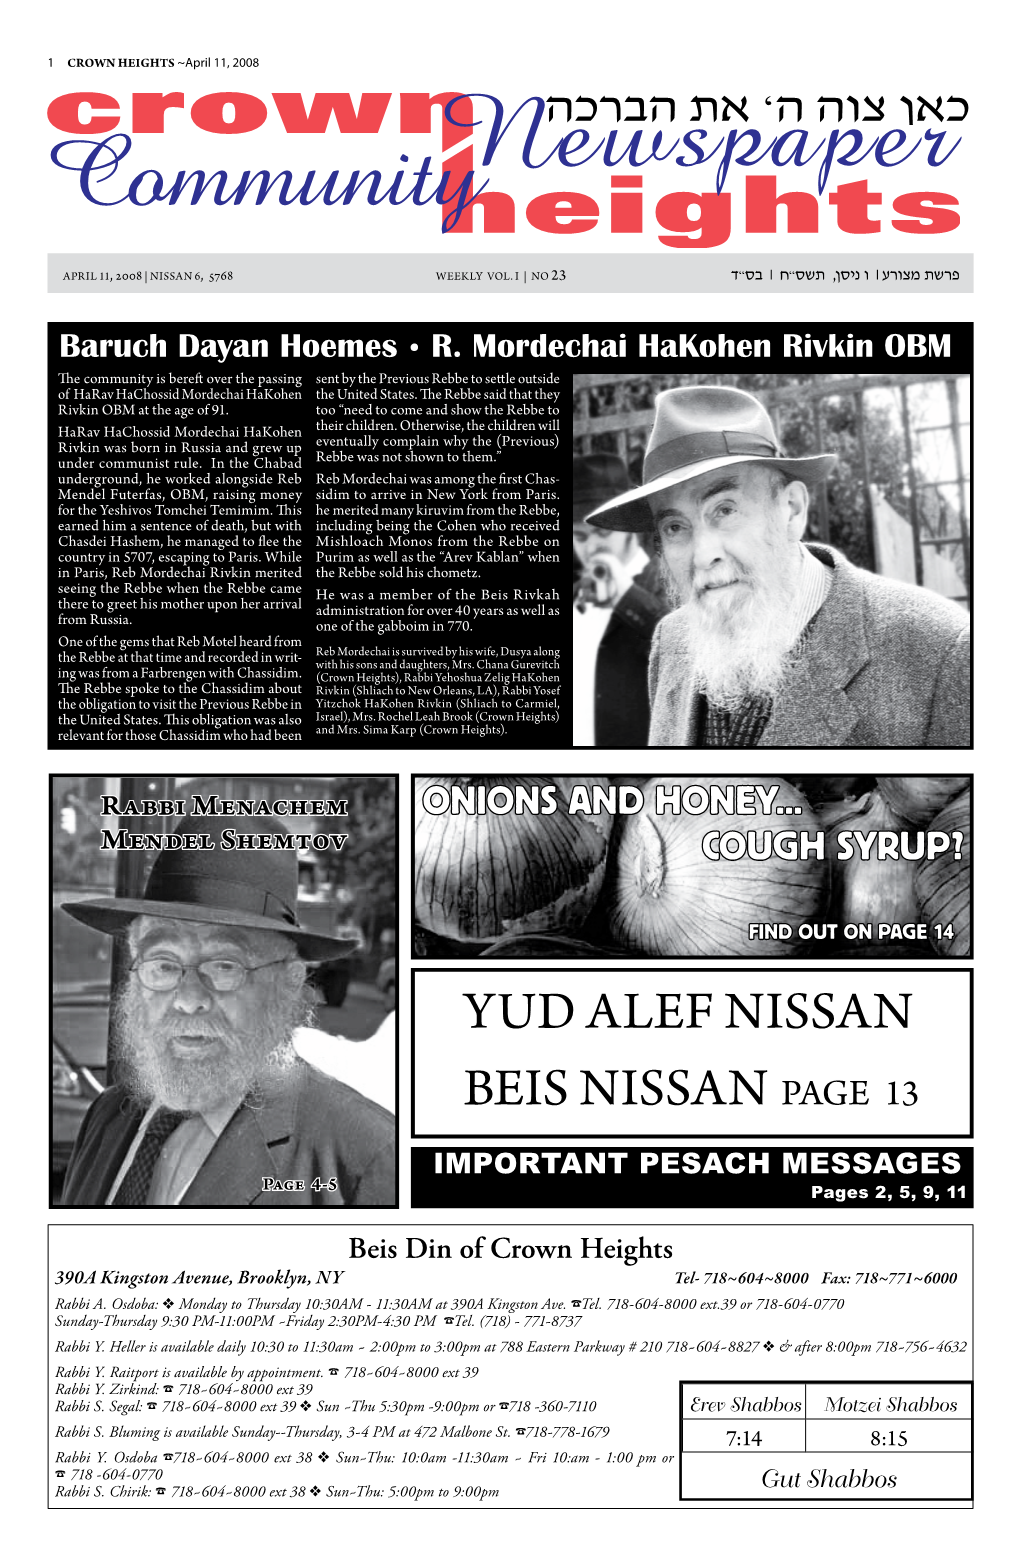 Yud Alef Nissan Beis Nissan Page 13